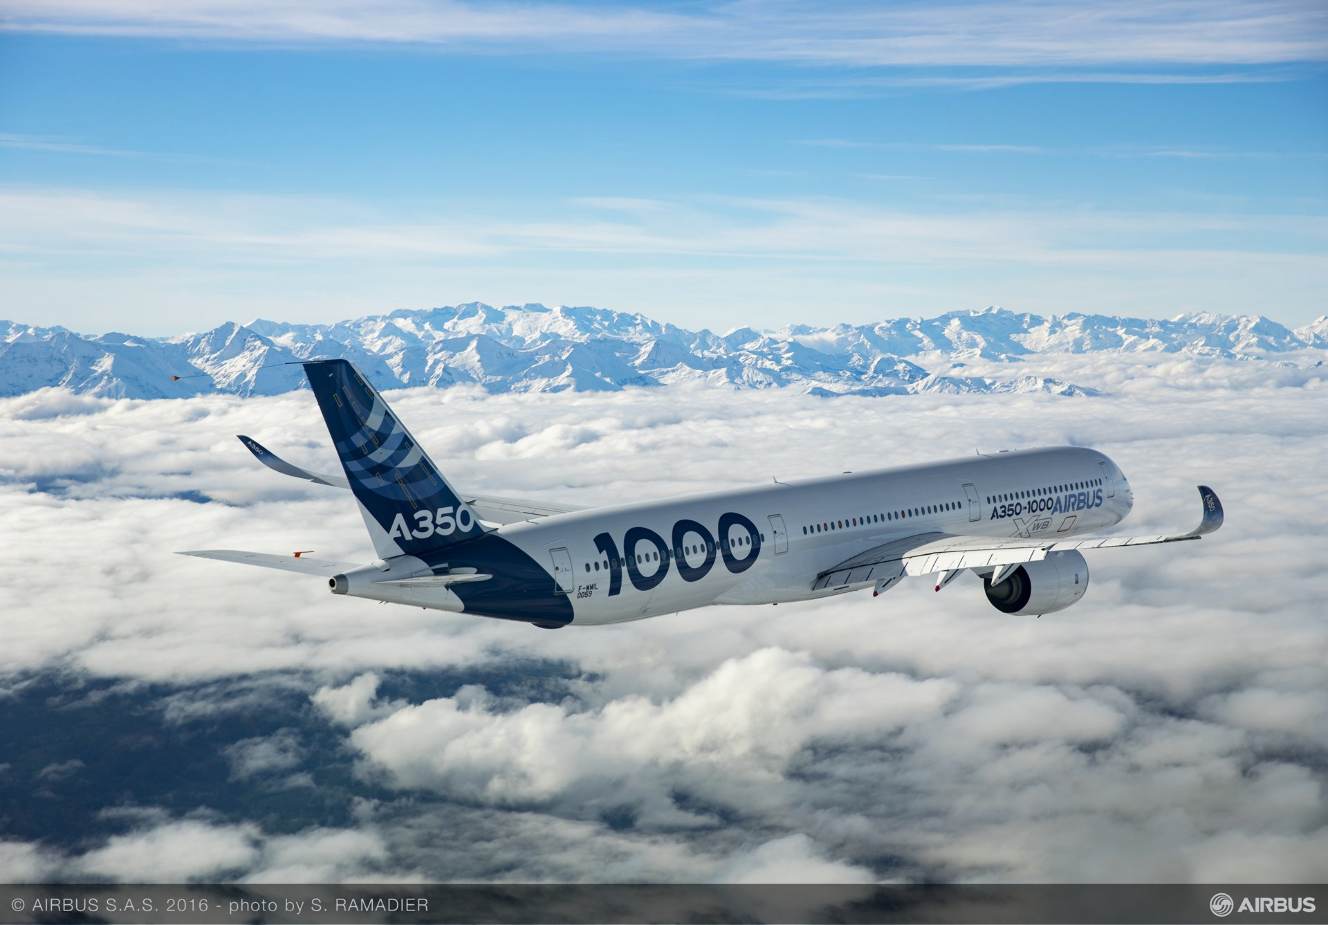 Singapore 2018: Airbus picks Thales for Asia-Pacific MRO